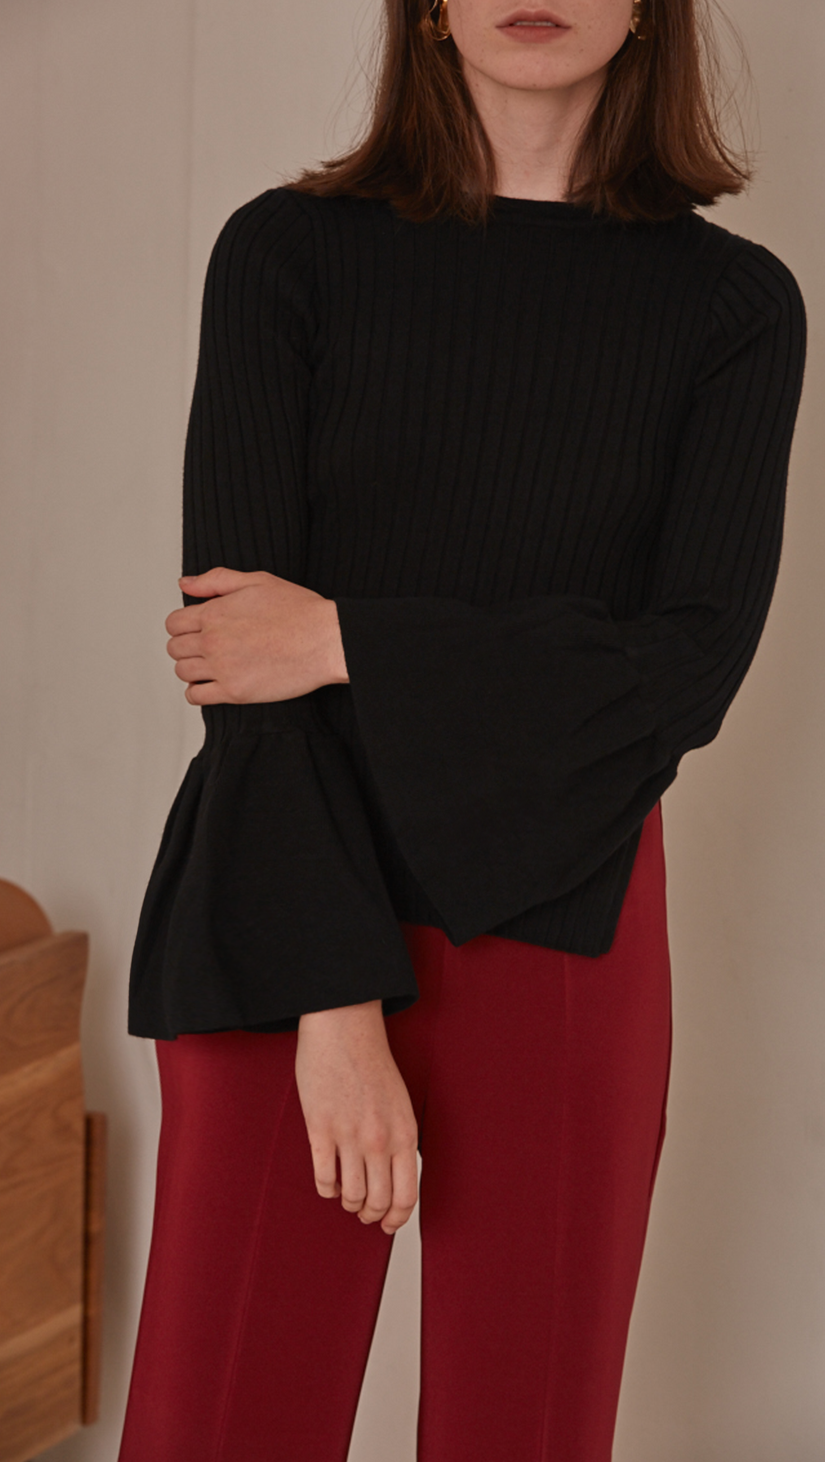 Etre Sweater in Black. Long bell sleeved rib knit in the avant-grade silhouette. Voluminous bell sleeves in cropped length top with side slit. Rounded hem. Super soft feel. Designed to skim the body.